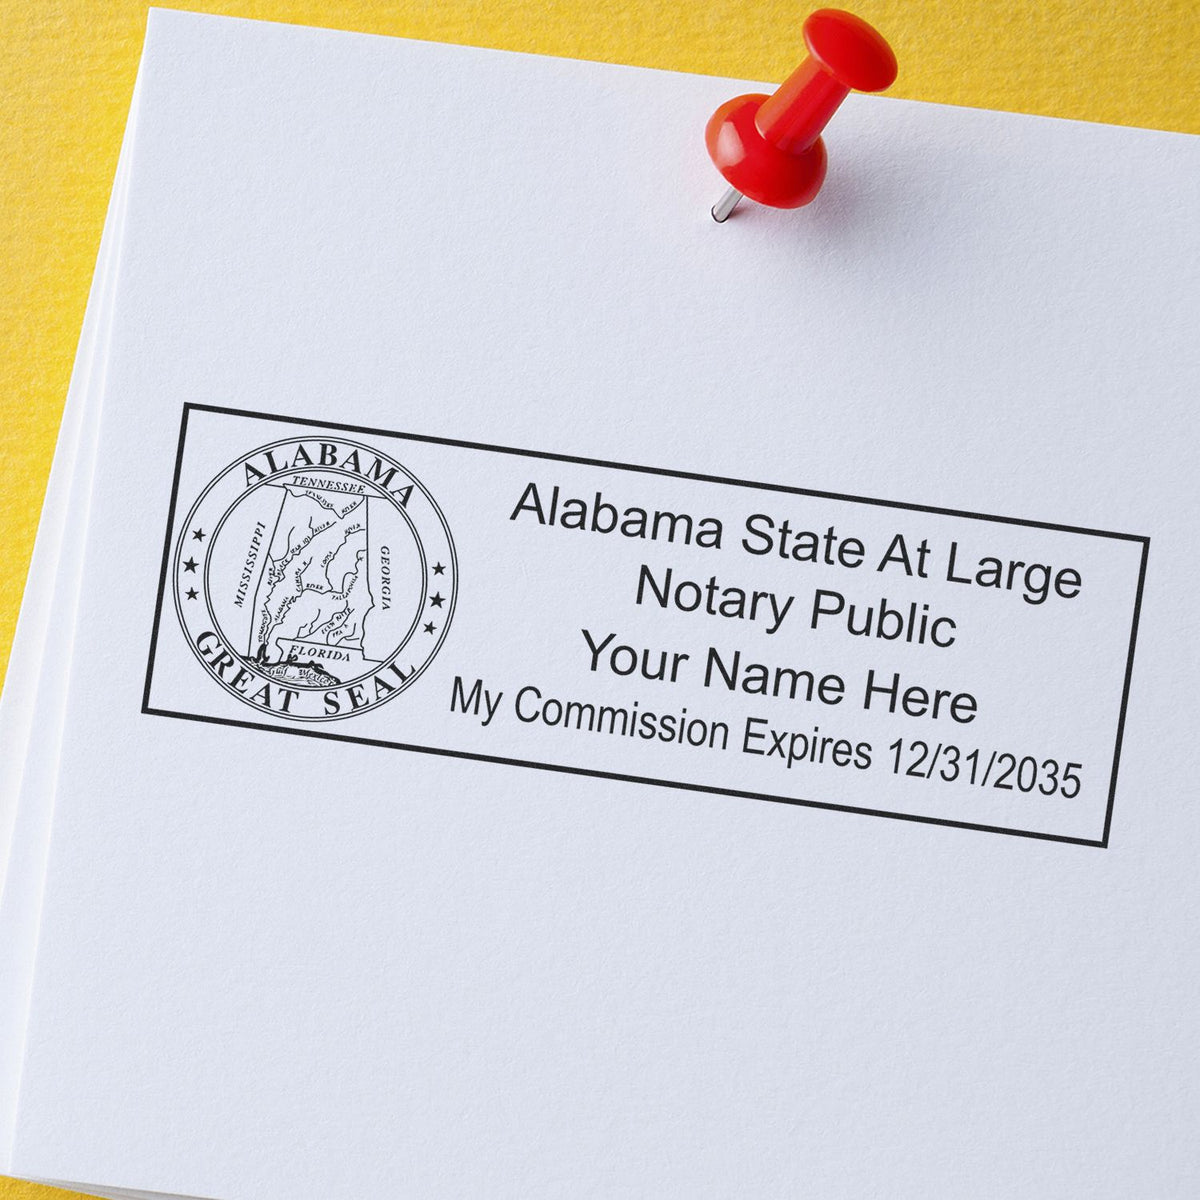 This paper is stamped with a sample imprint of the Super Slim Alabama Notary Public Stamp, signifying its quality and reliability.